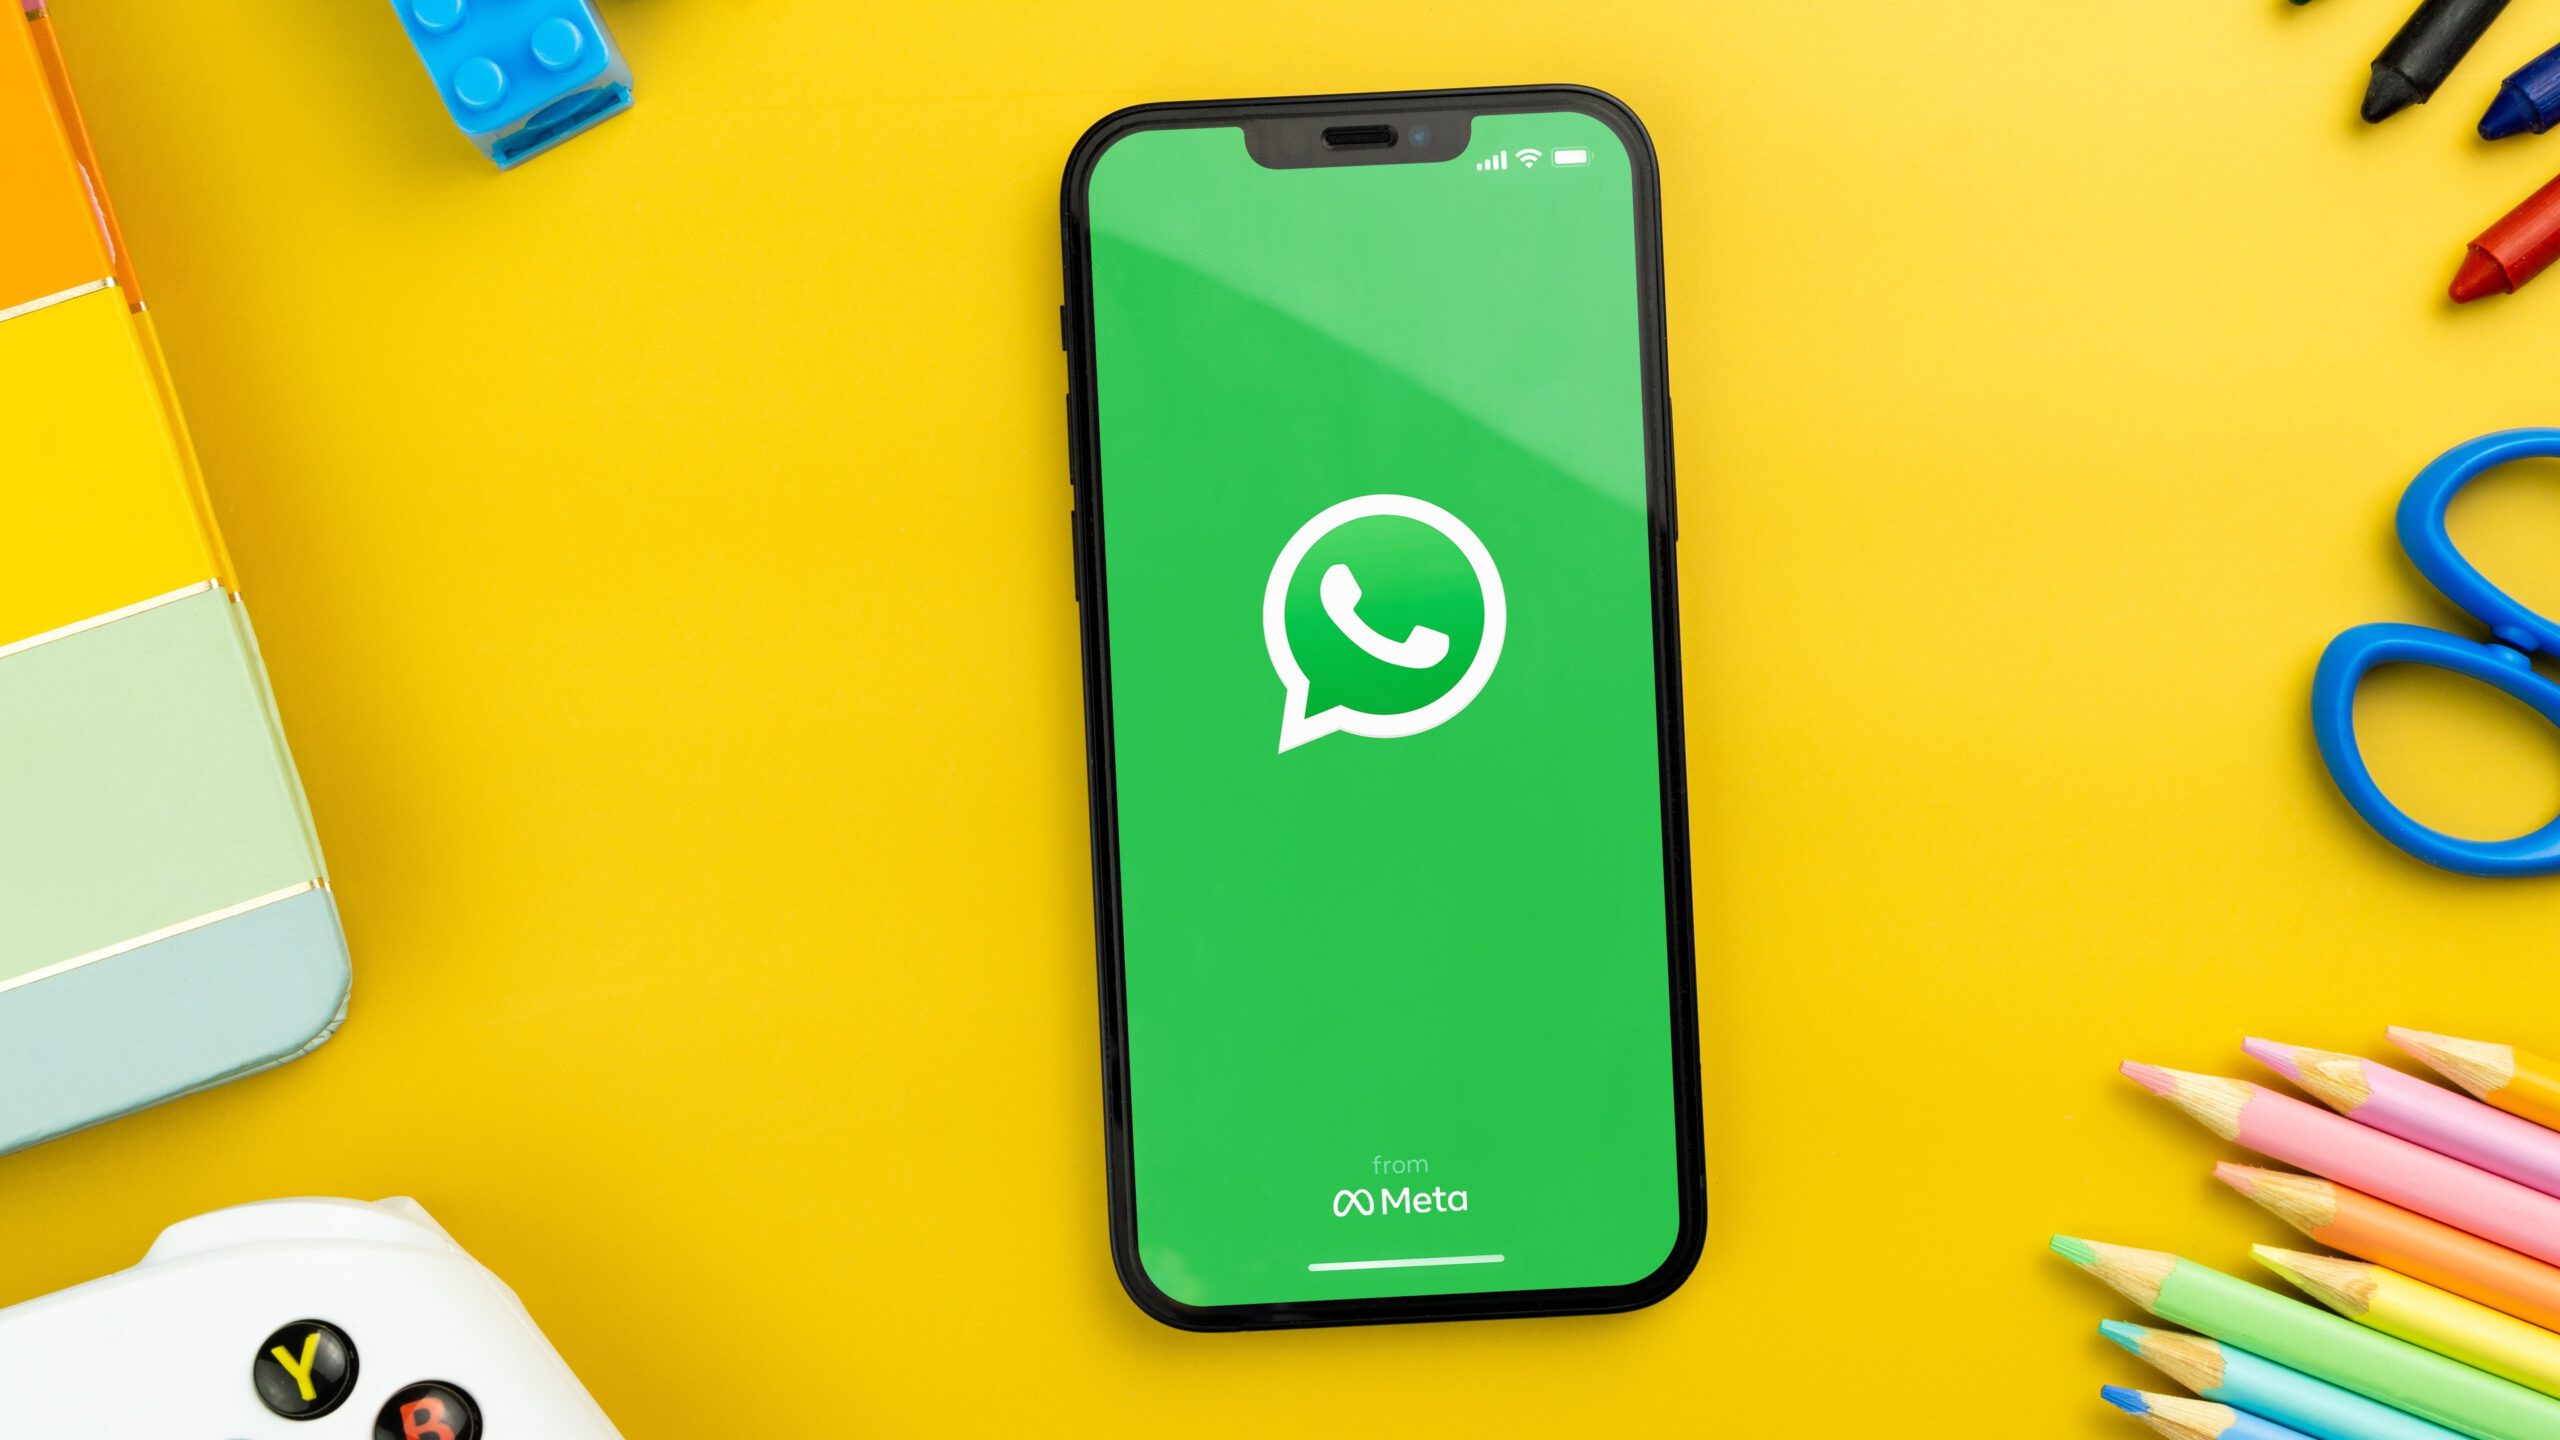 WhatsApp on a yellow desk with colorful accessories